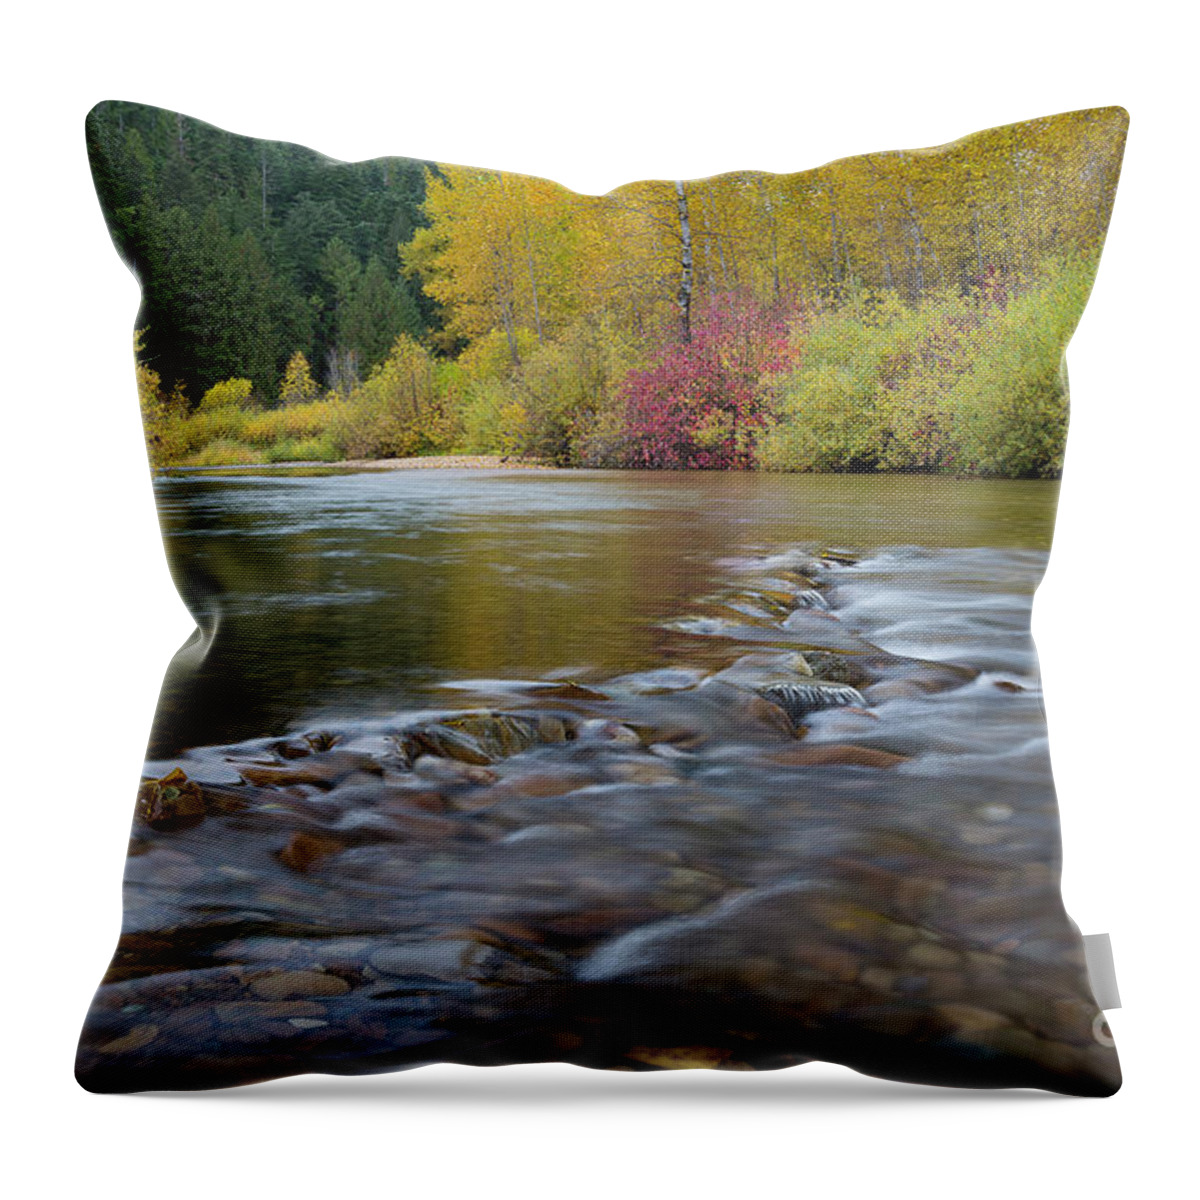 Coeur D' Alene River Throw Pillow featuring the photograph Autumn Ripples by Idaho Scenic Images Linda Lantzy